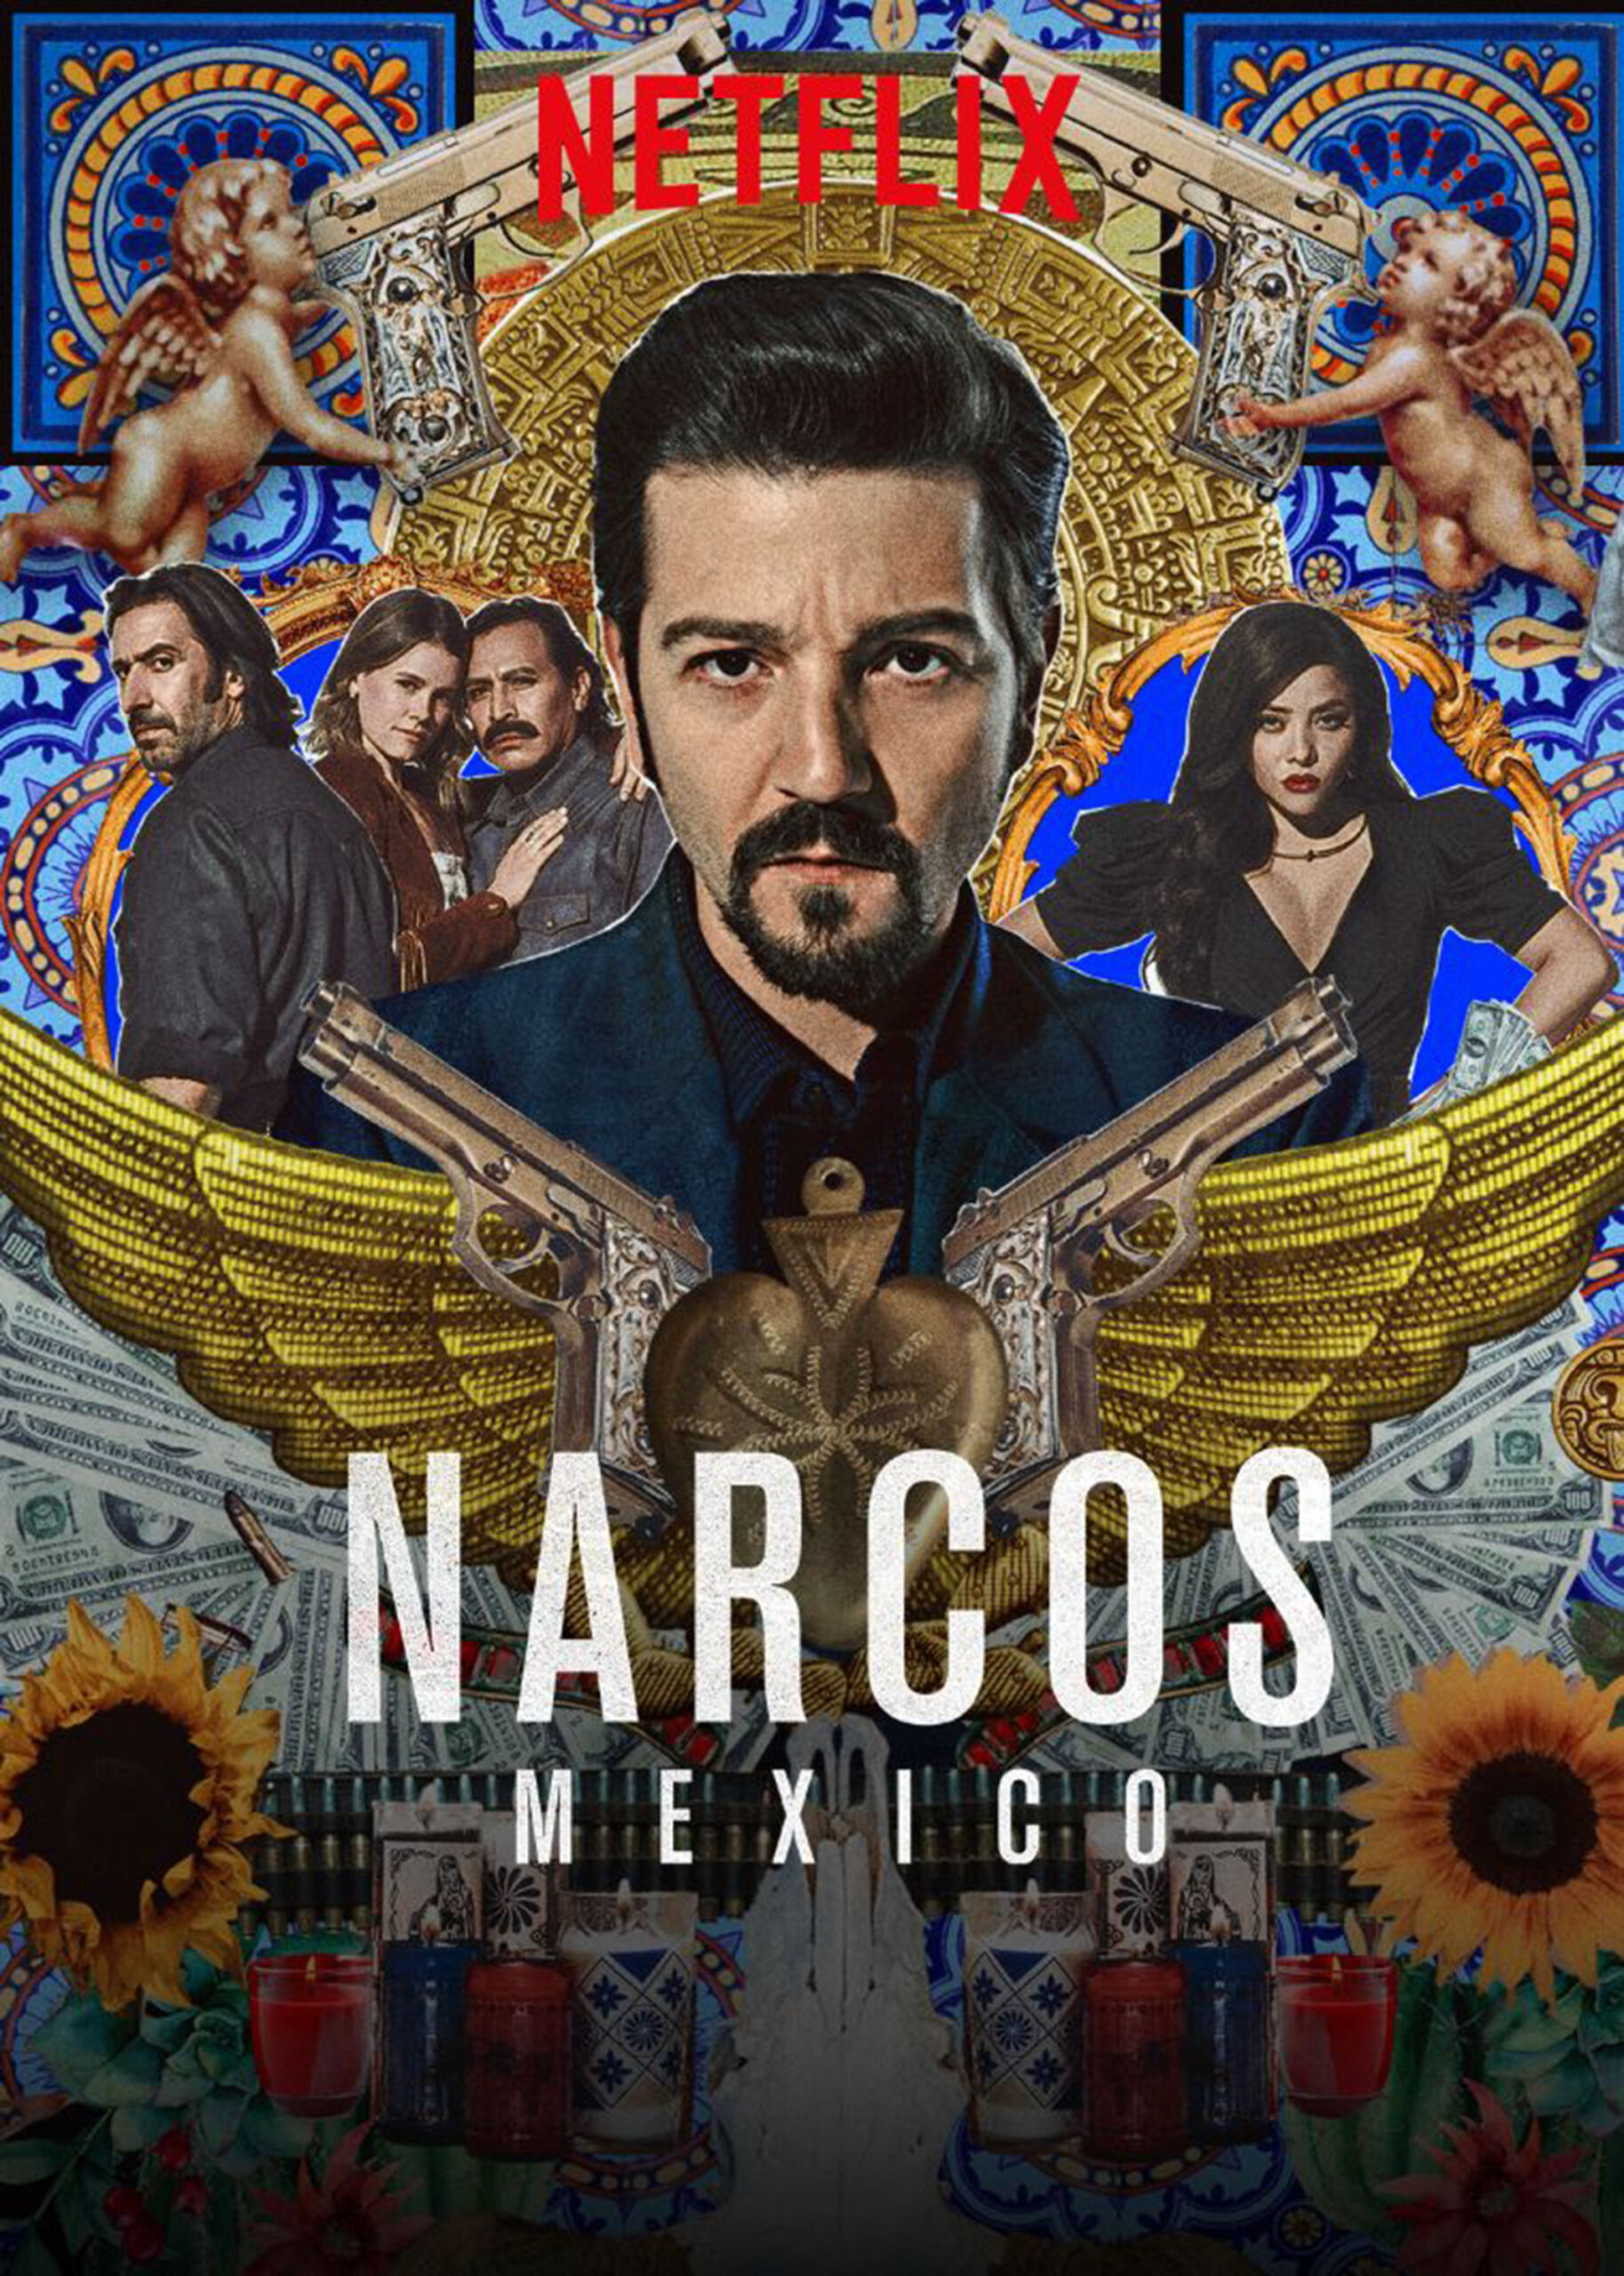 Narcos Mexico 2 2020 Webseries Dubbed In Hindi 13620 Poster.jpg